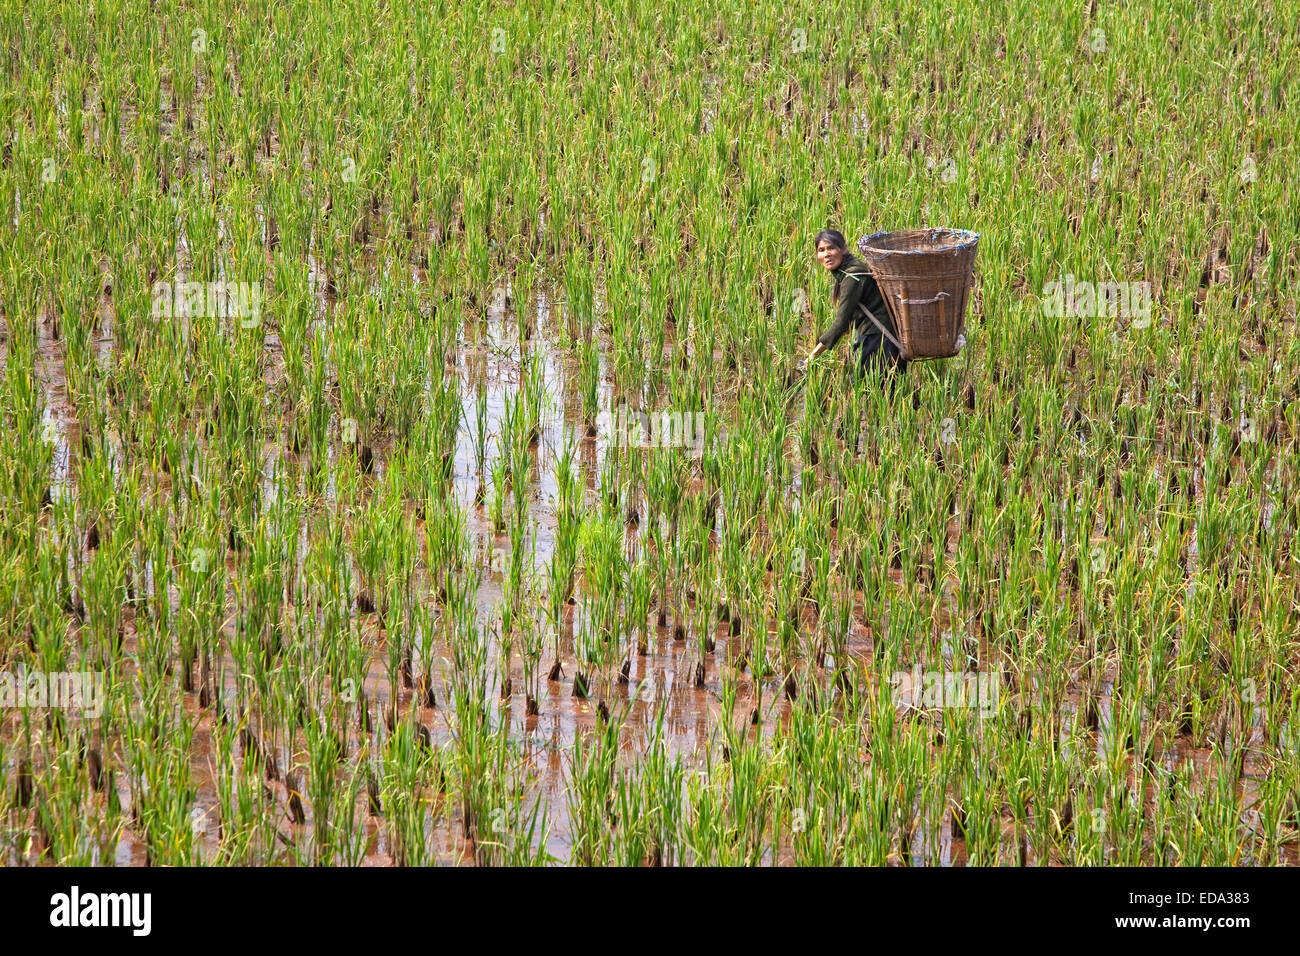 Tibetan woman working in rice paddy field with large basket on her back in the lowlands of the Sichuan province, China Stock Photo